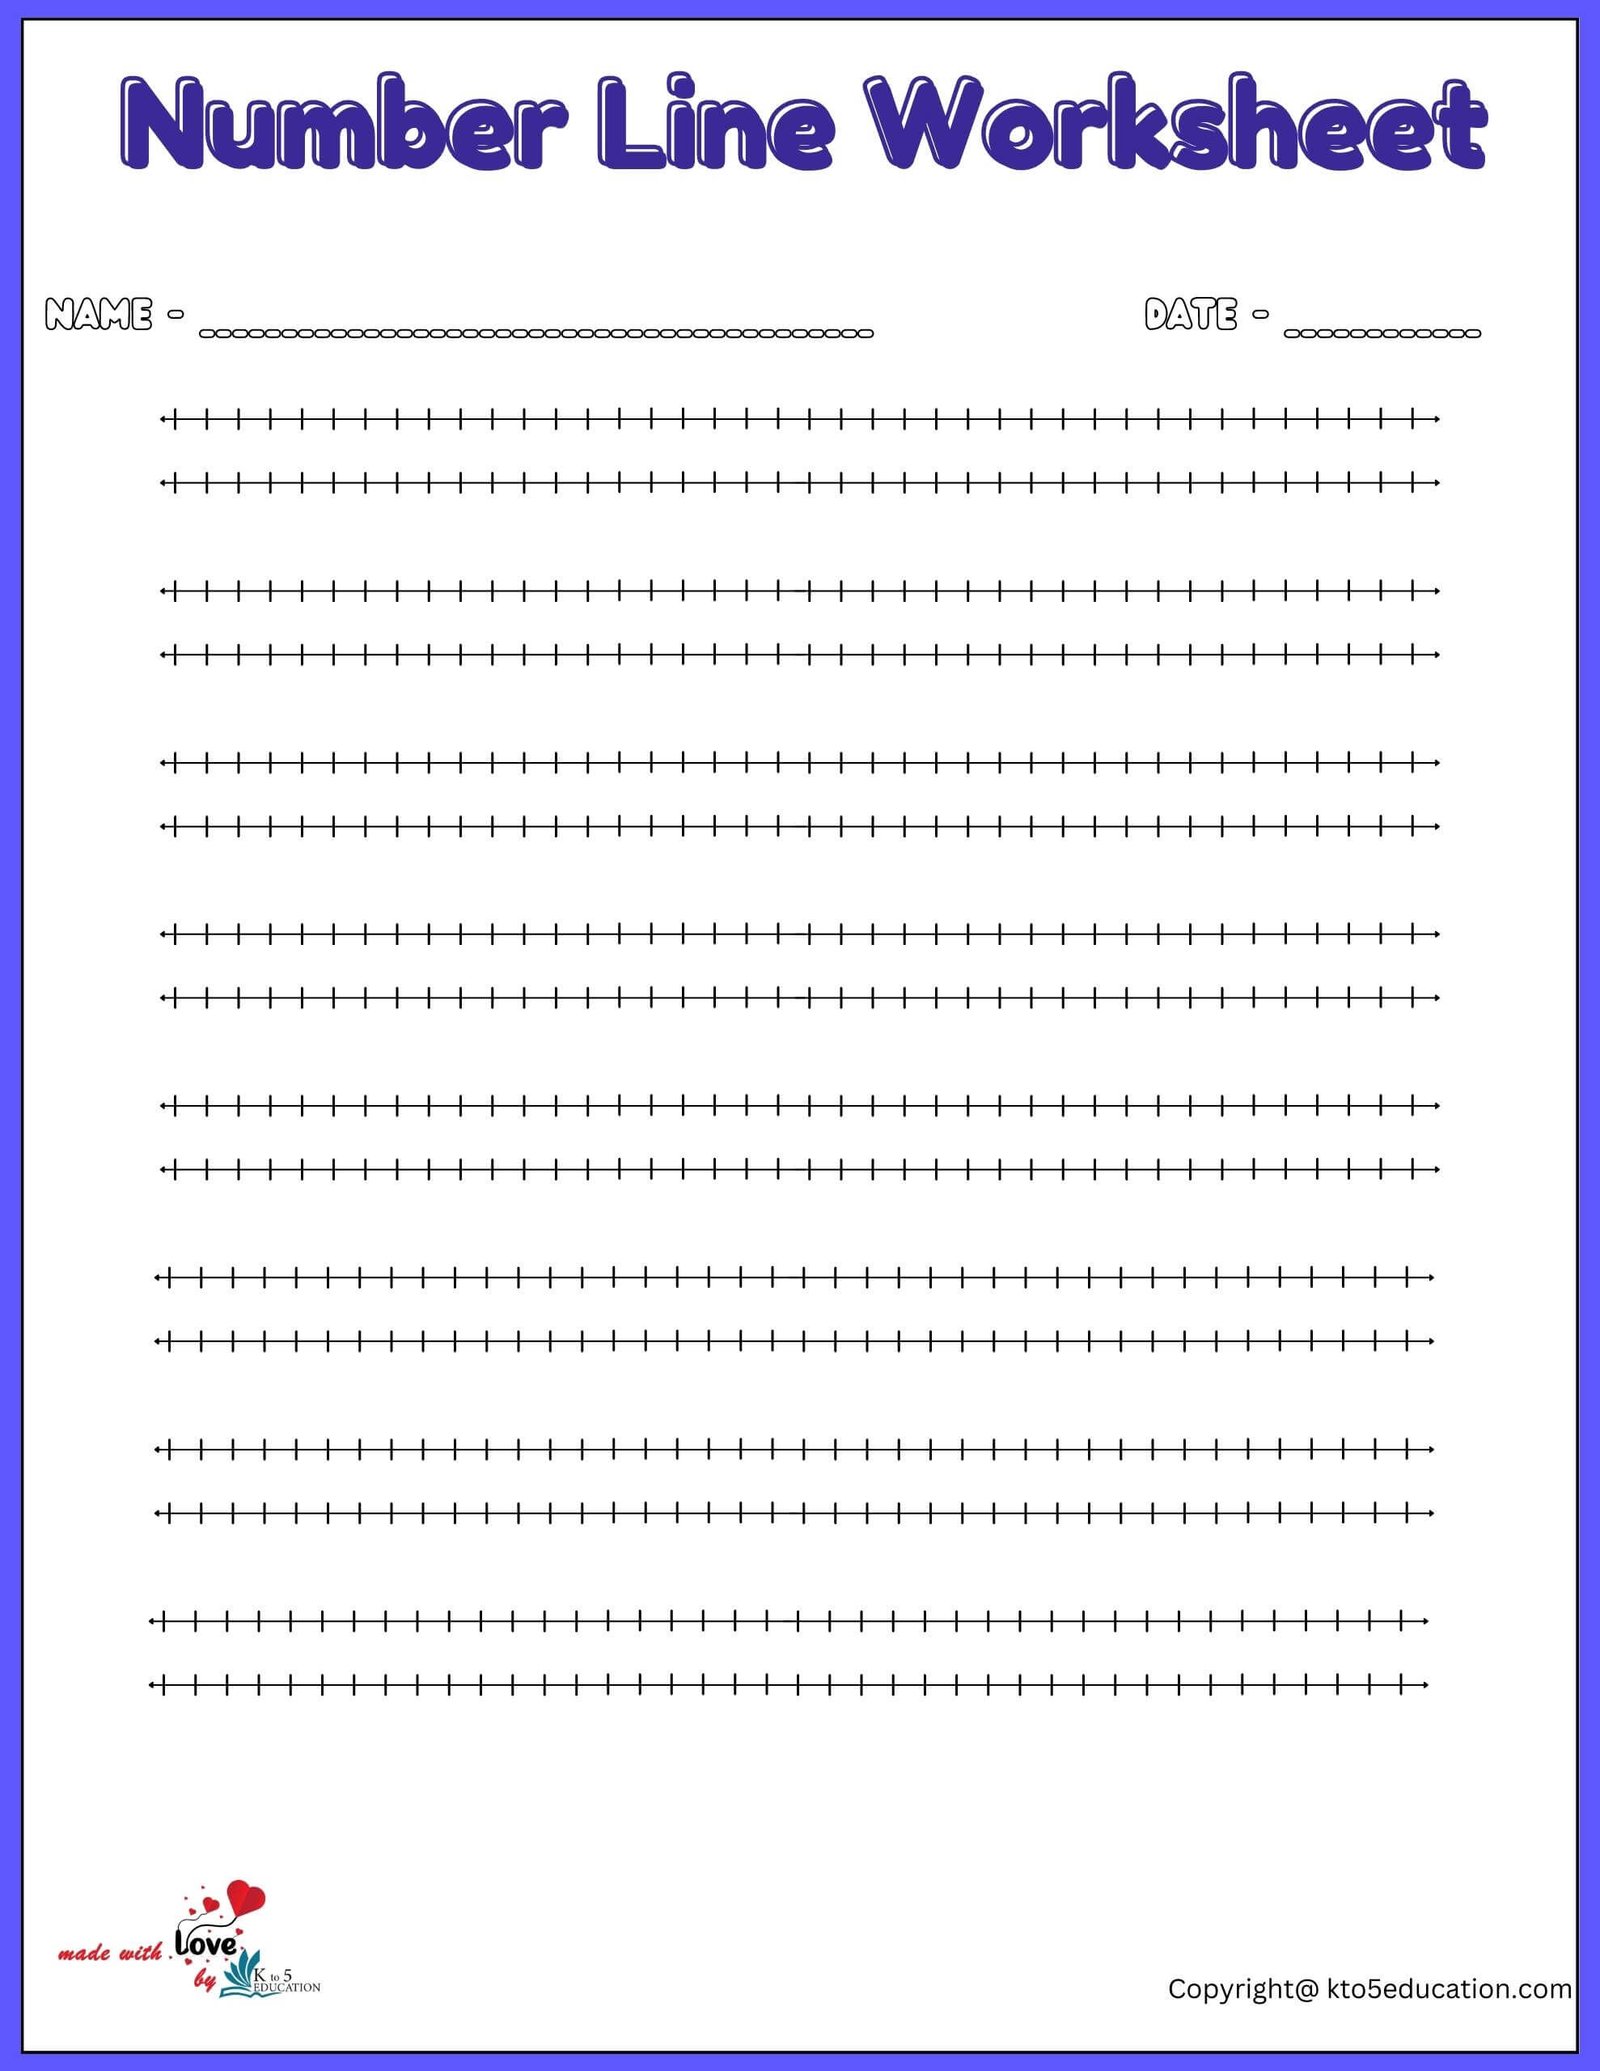 free-double-number-line-worksheet-1-40-free-download